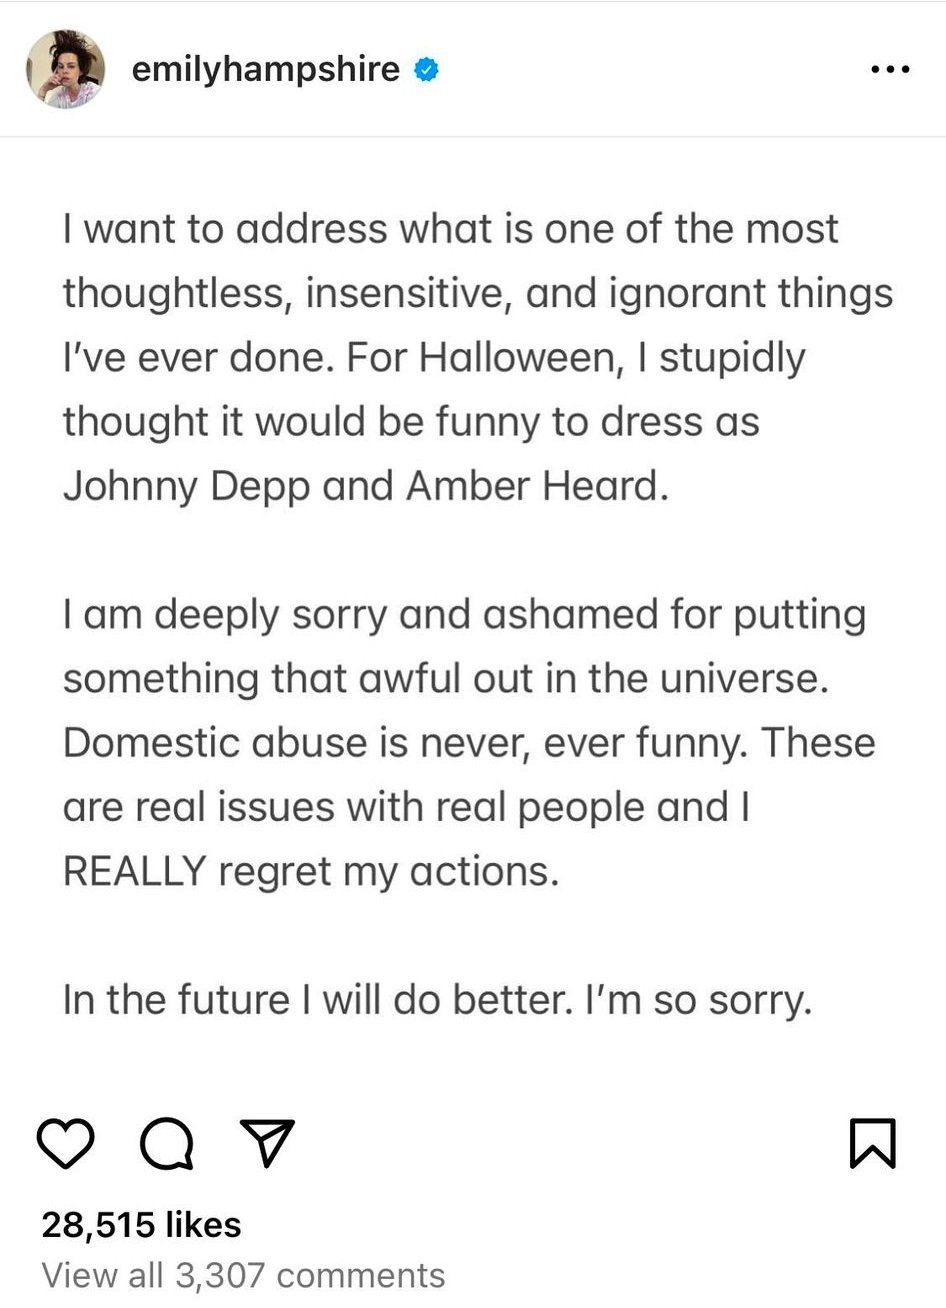 Screenshot of Emily Hampshire's apology on Instagram